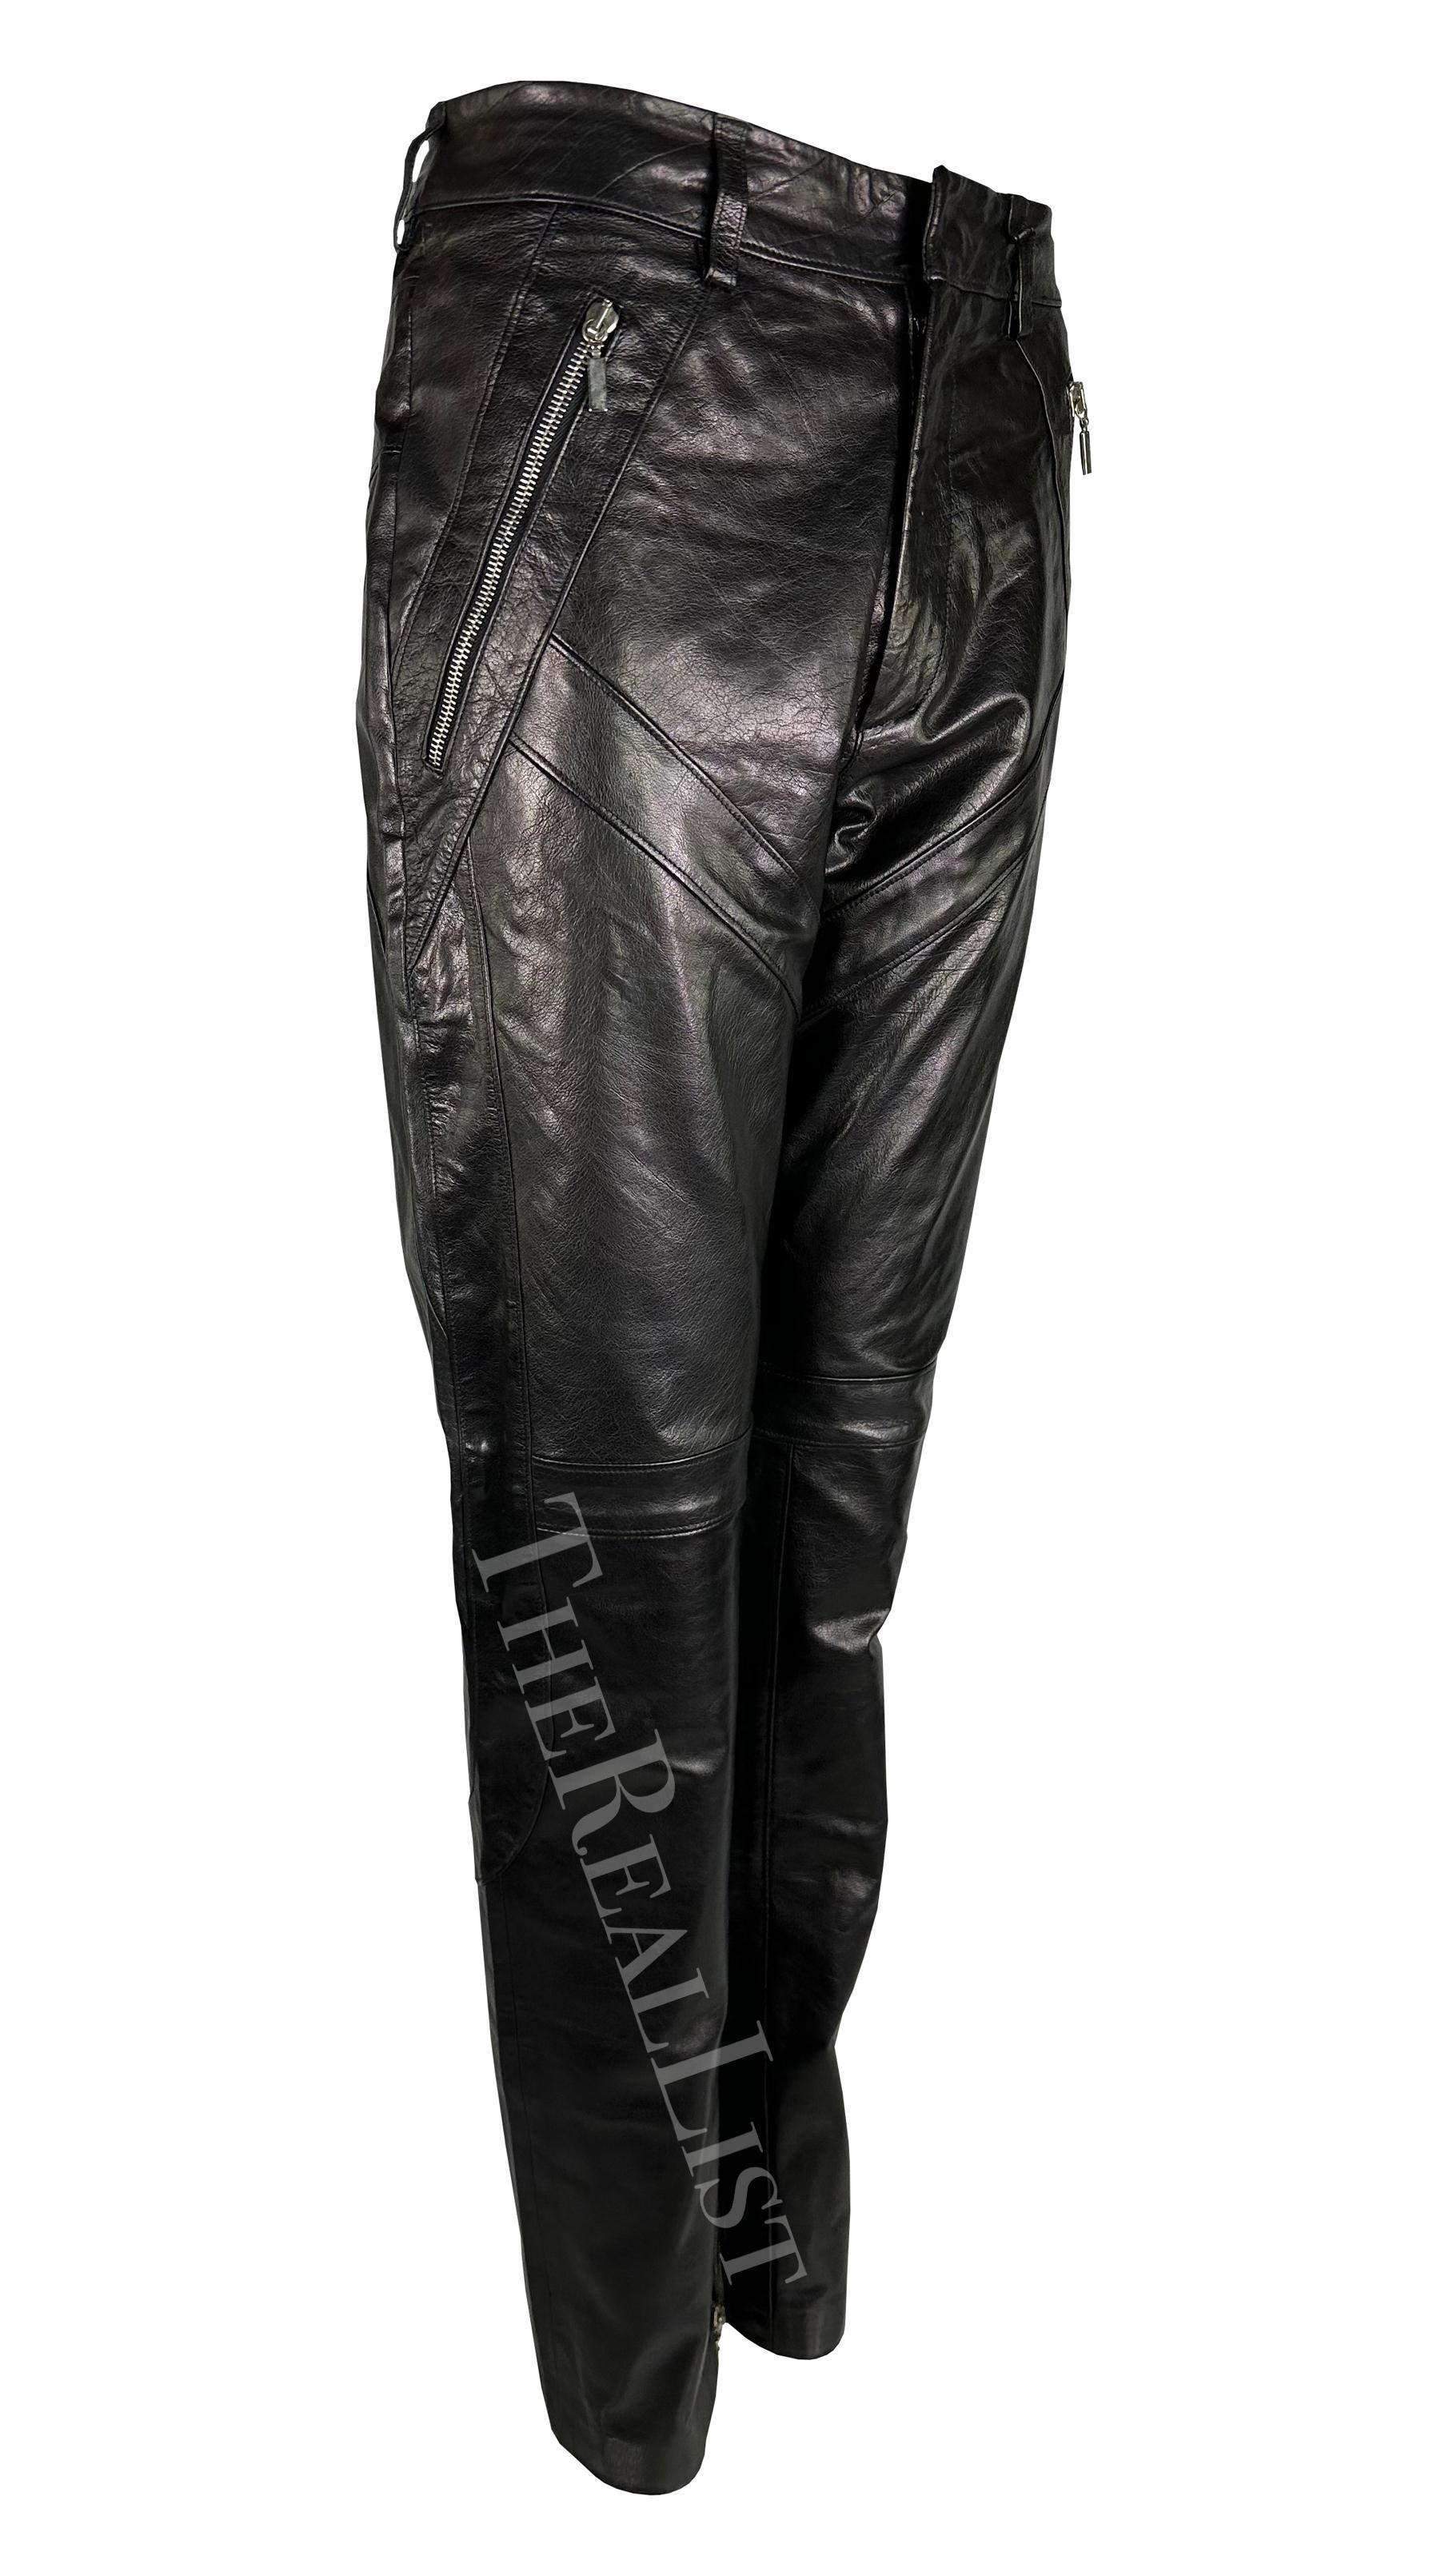 S/S 2002 Gianni Versace by Donatella Black Leather Moto Style Zip Pants For Sale 6